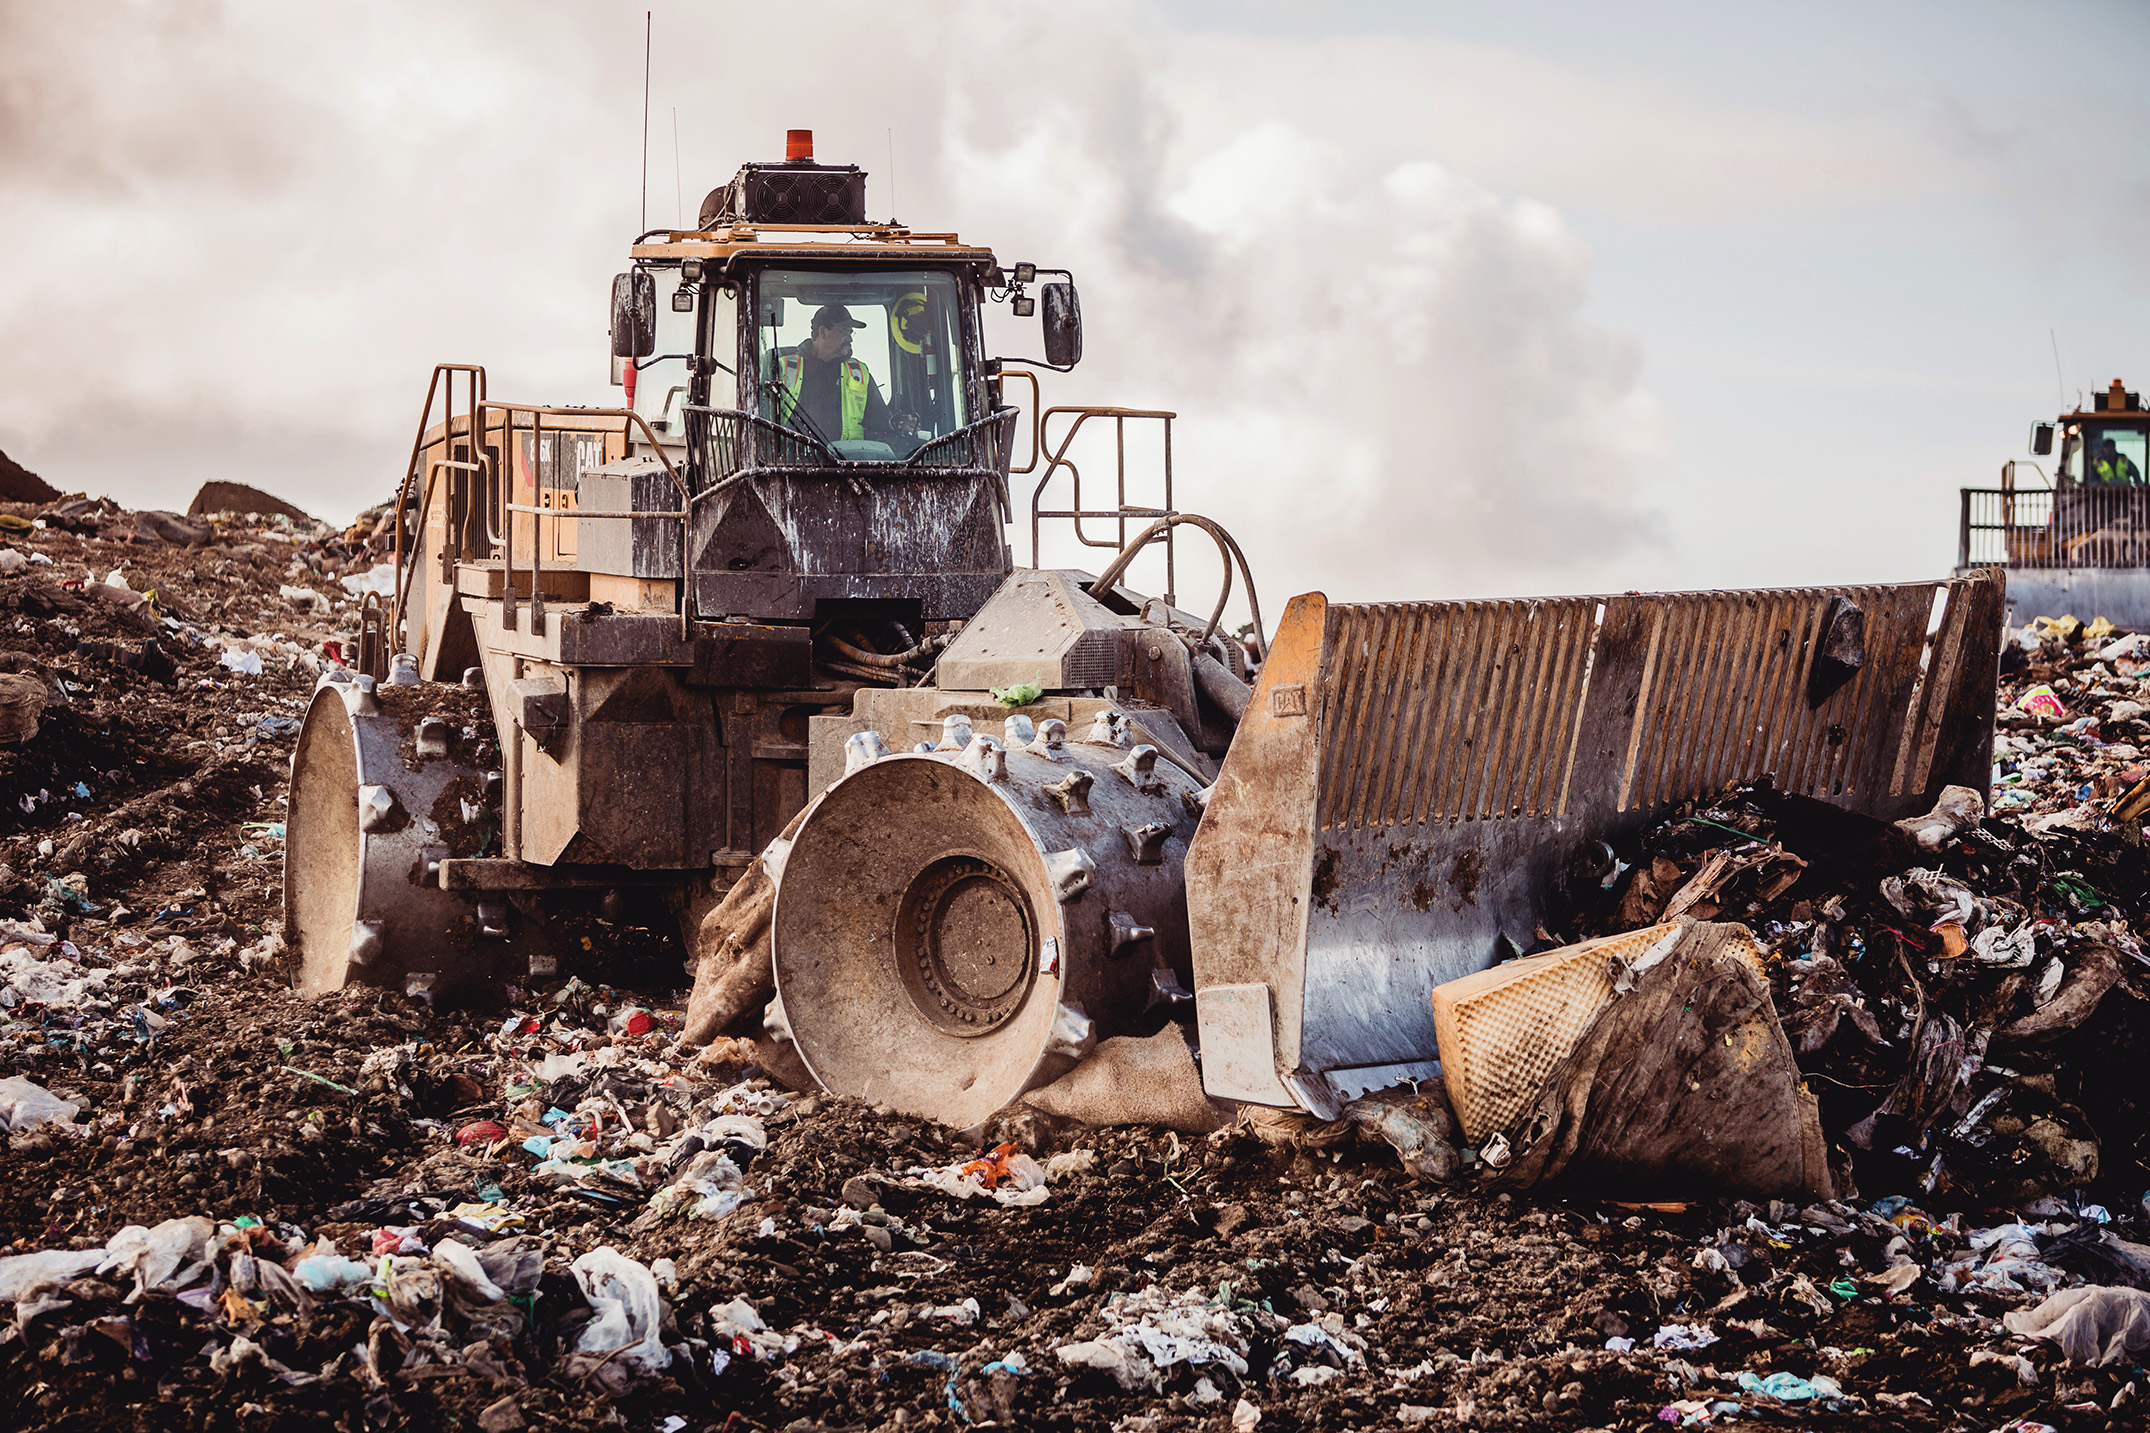 Mike Kane | Landfill dozer at Waste Management facility in Eastern Washington | Seattle documentary, editorial, and commercial photography